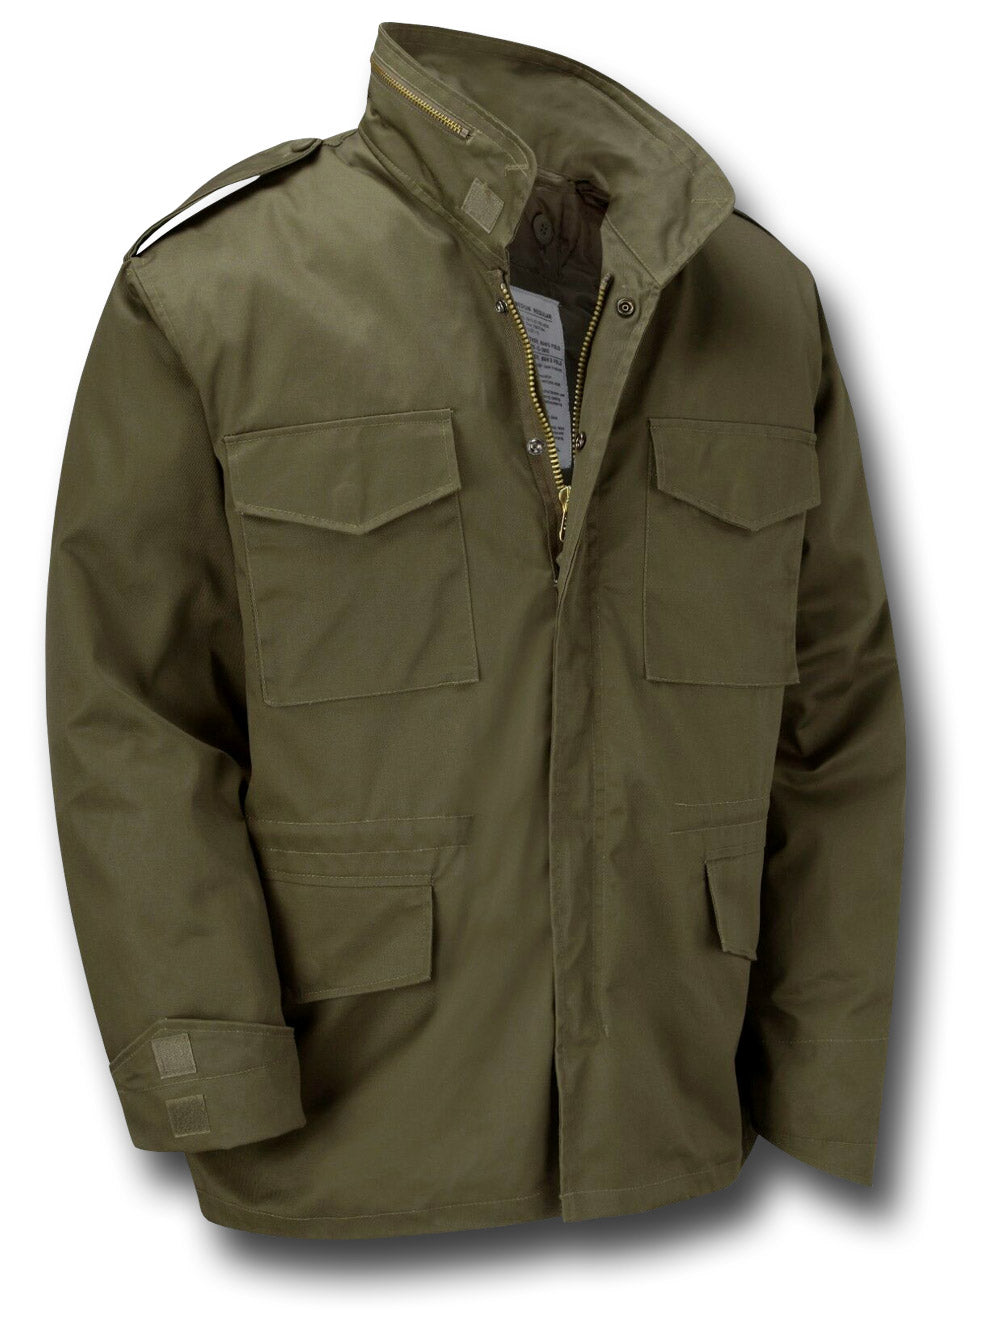 M65 STYLE JACKET WITH LINER - GREEN